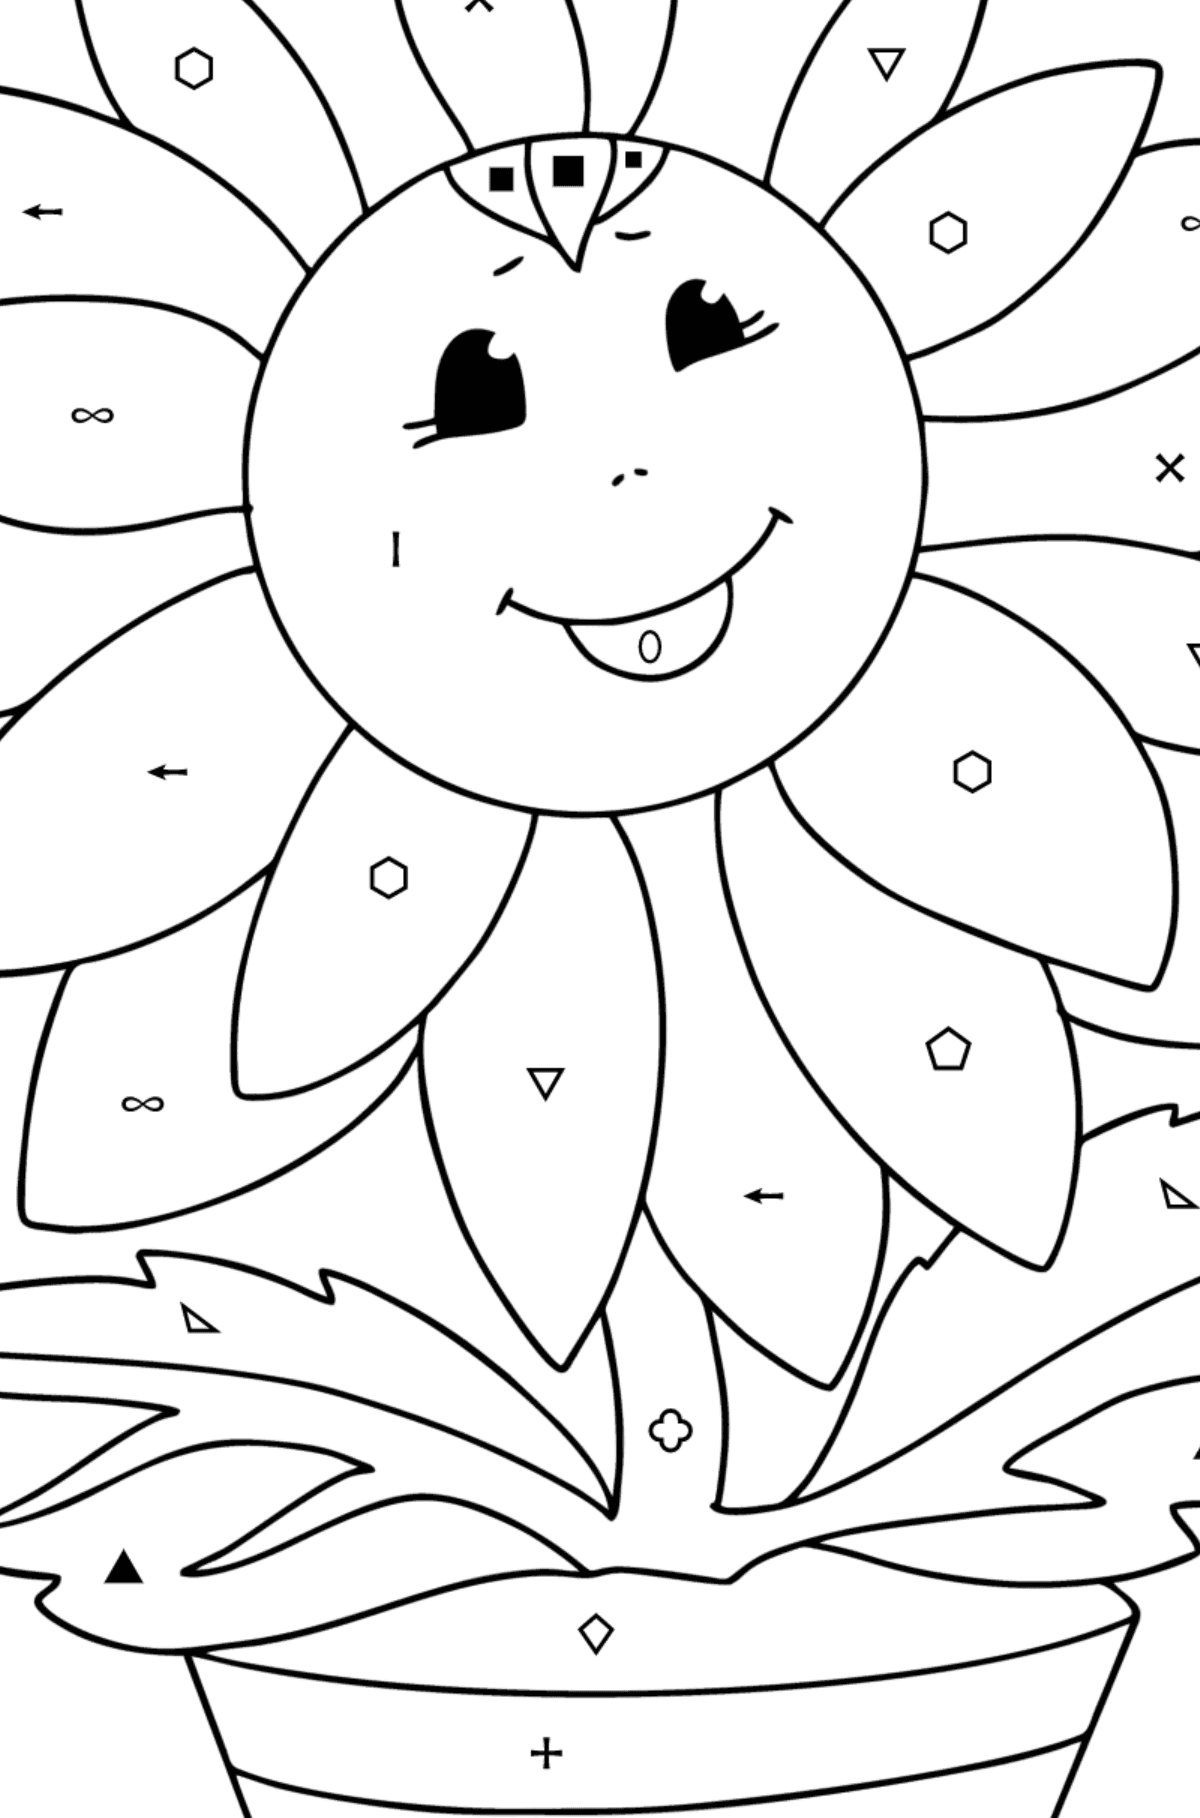 Sunflower with eyes coloring page - Coloring by Symbols and Geometric Shapes for Kids